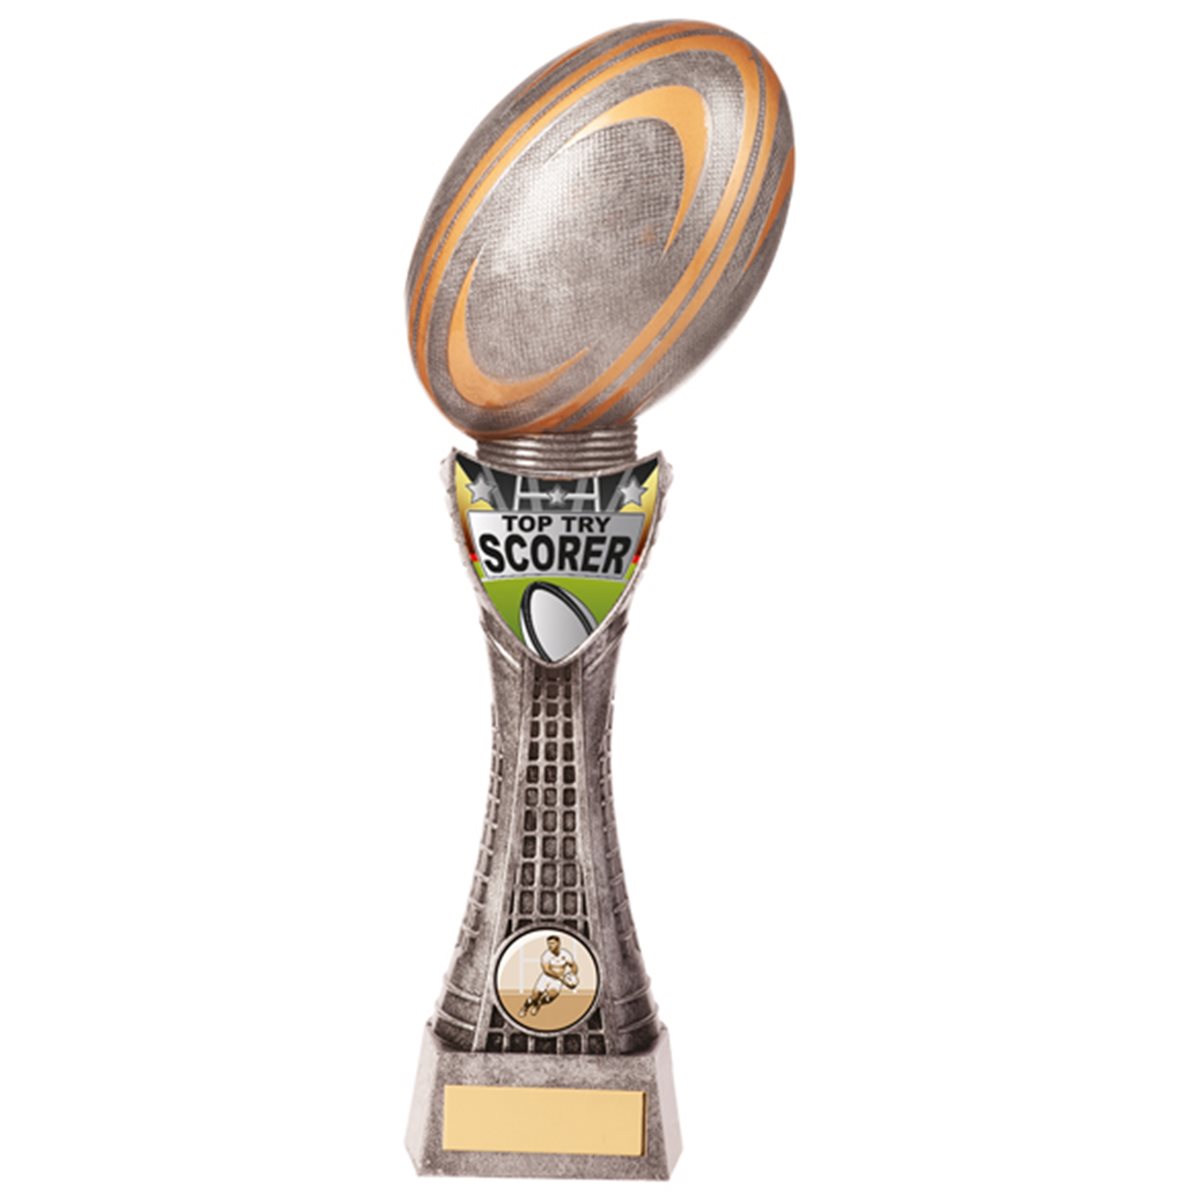 Valiant Top Try Scorer Rugby Resin Trophy PM20663